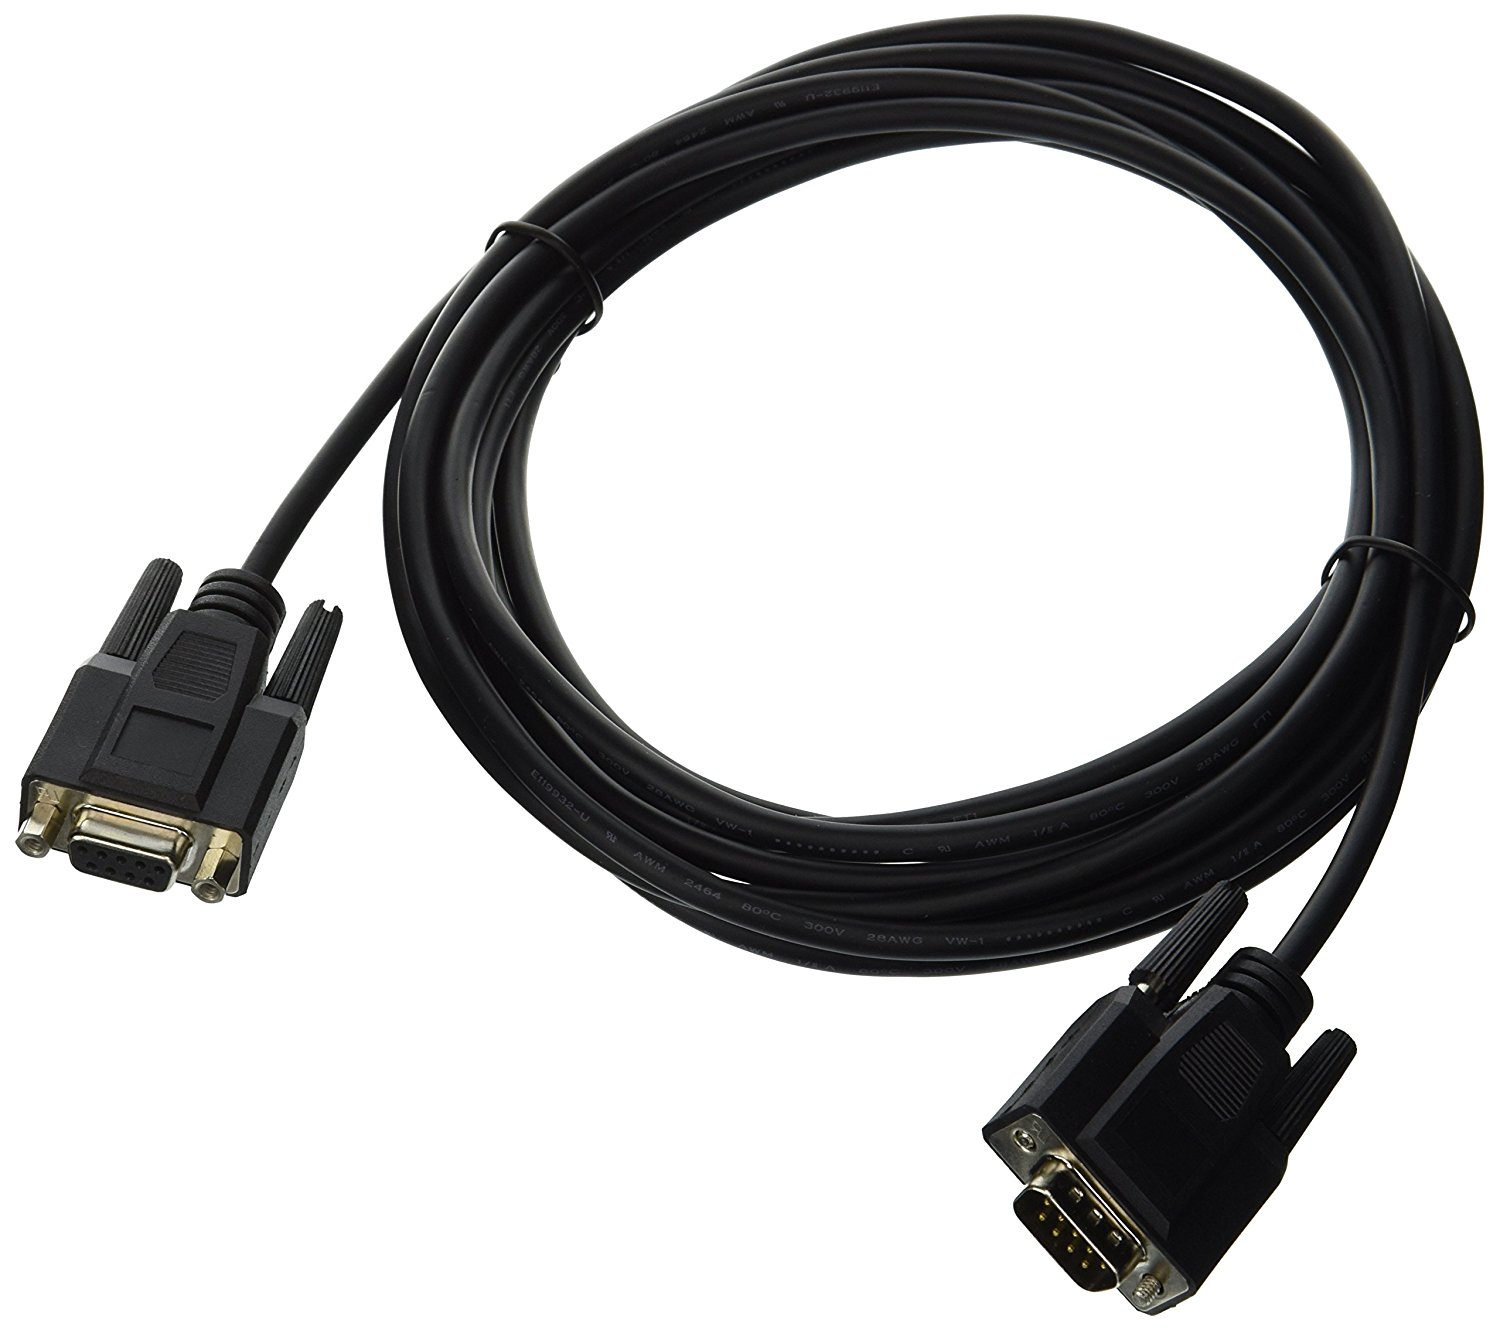 C2G/Cables to Go 52032 DB9 M/F Serial RS232 Extension Cable - Black (15 Feet)